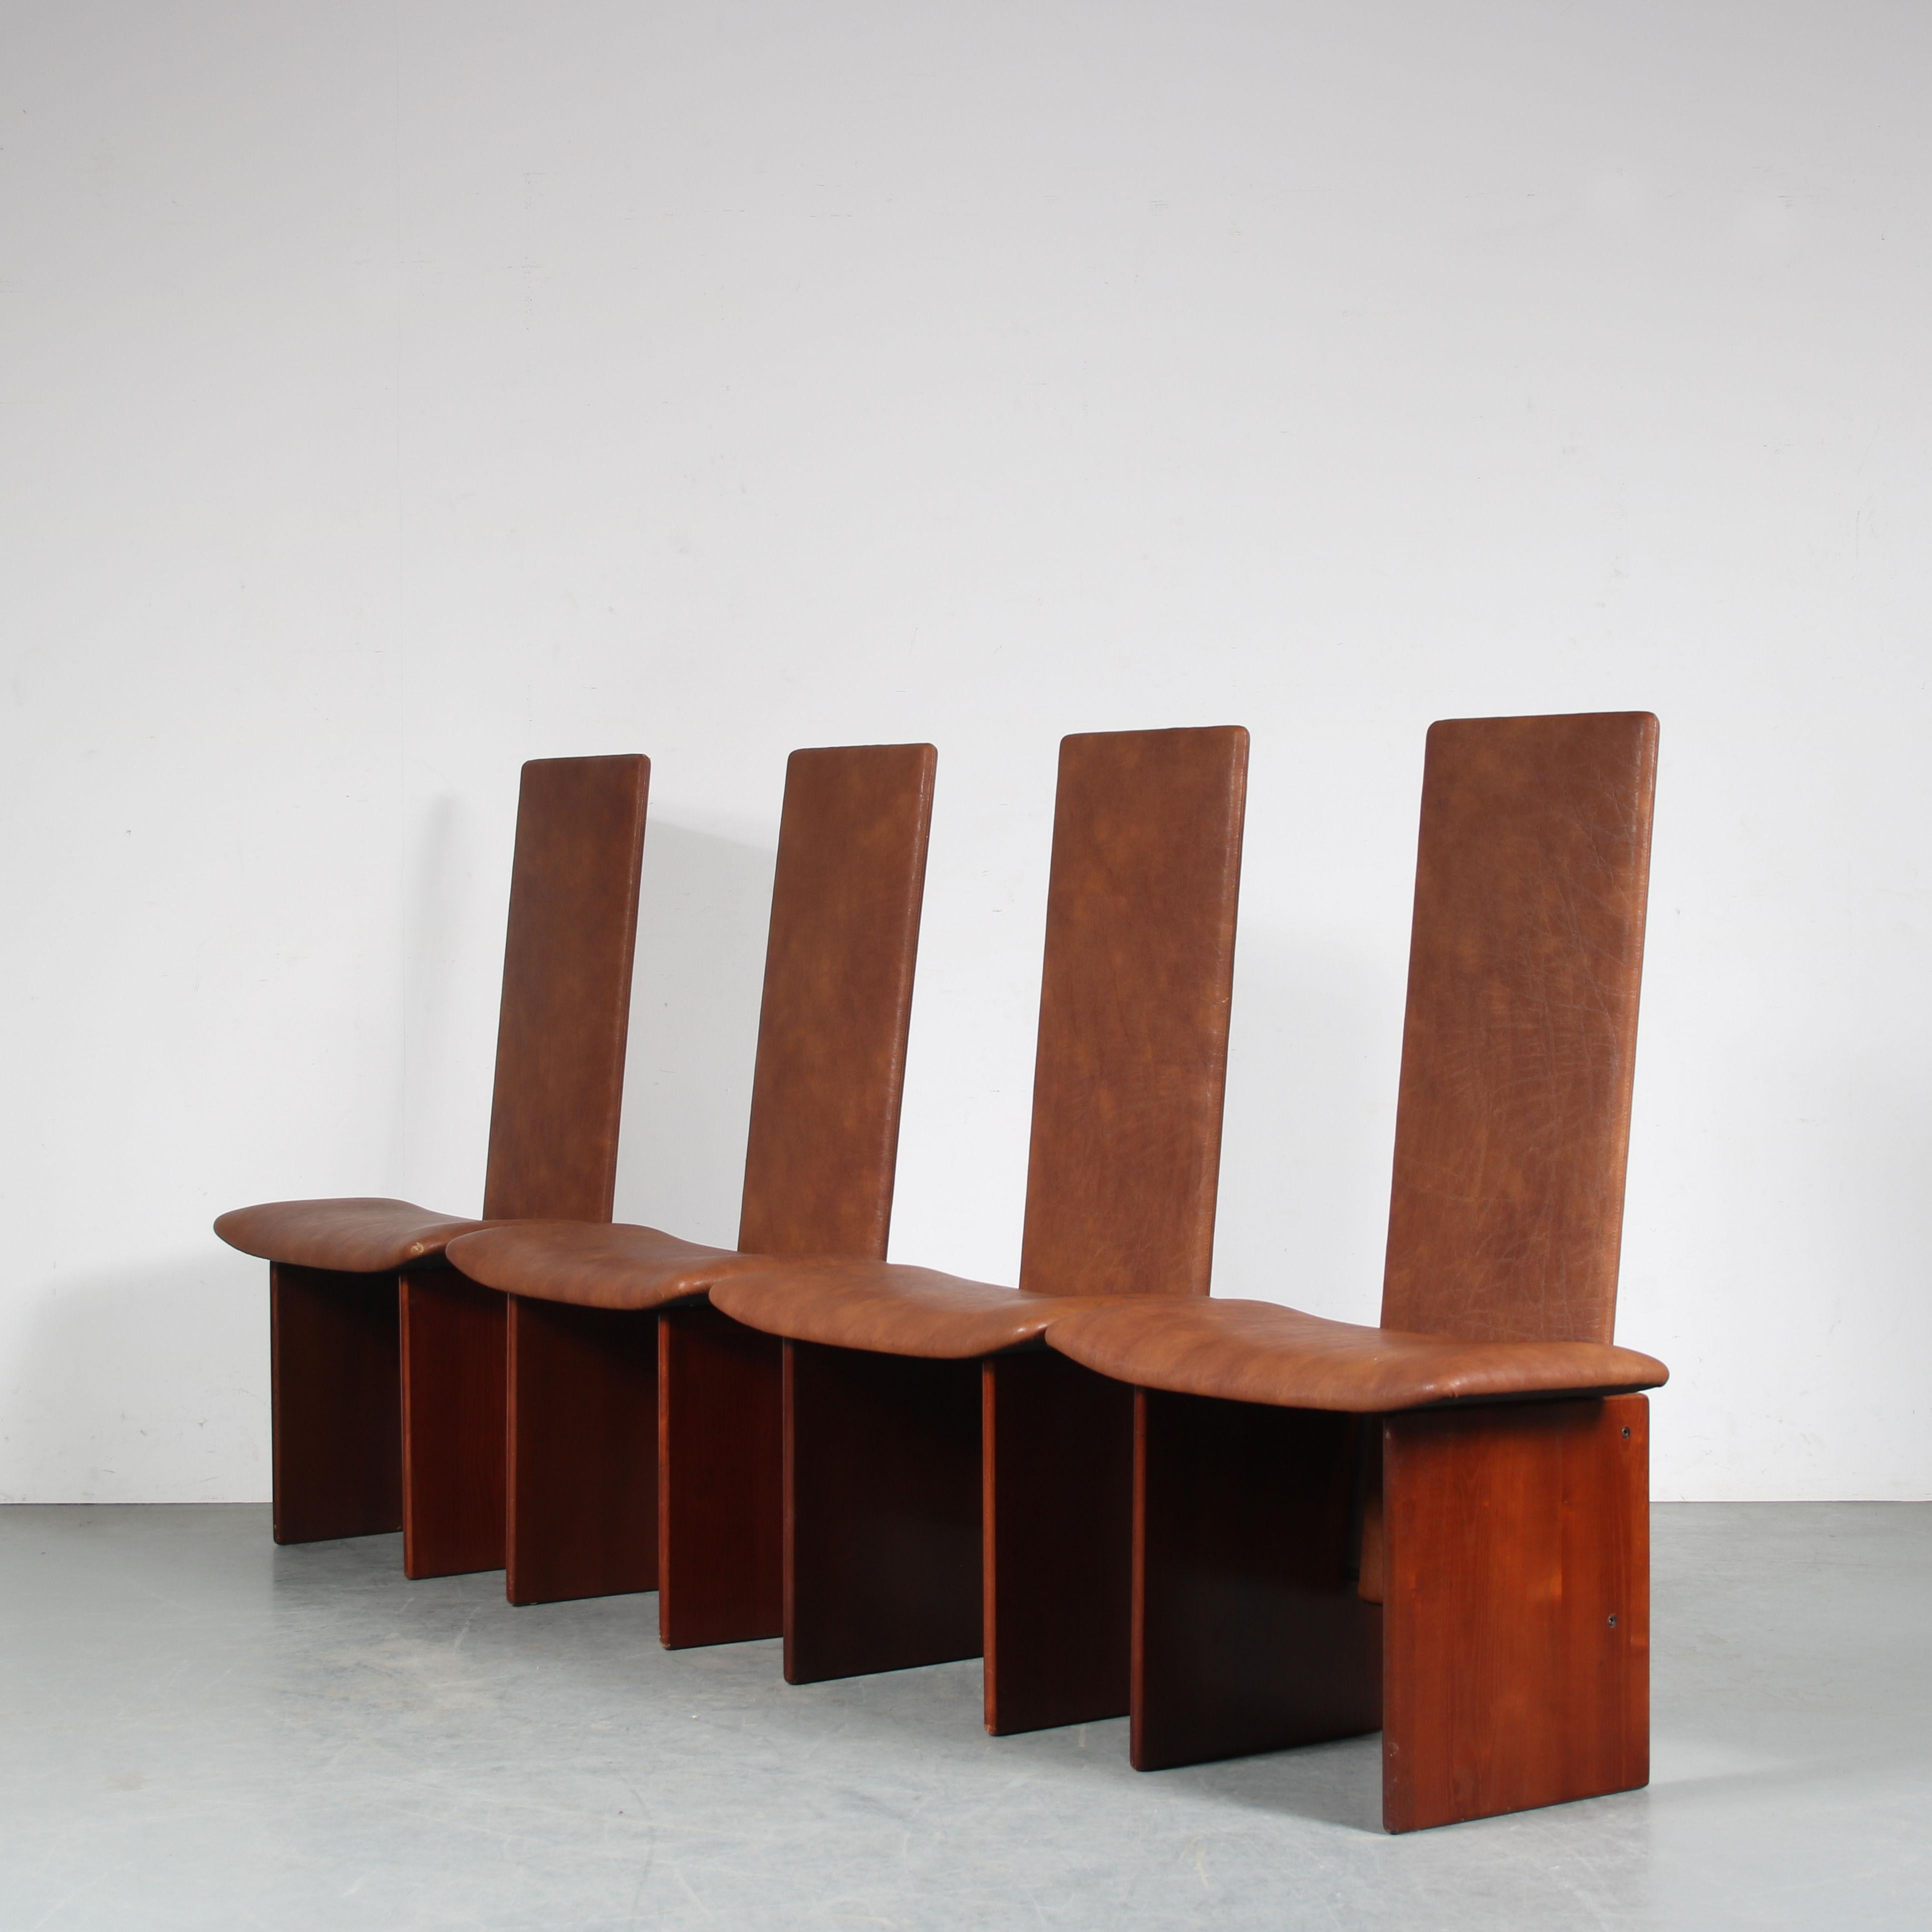 An impressive set of four dining chairs designed by Kazuhide Takahama, manufactured by Gavina in Italy around 1980.

The chairs, model “Kazuki”, are made of high quality brown wood. The seats and backs are upholstered in matching brown skai (faux